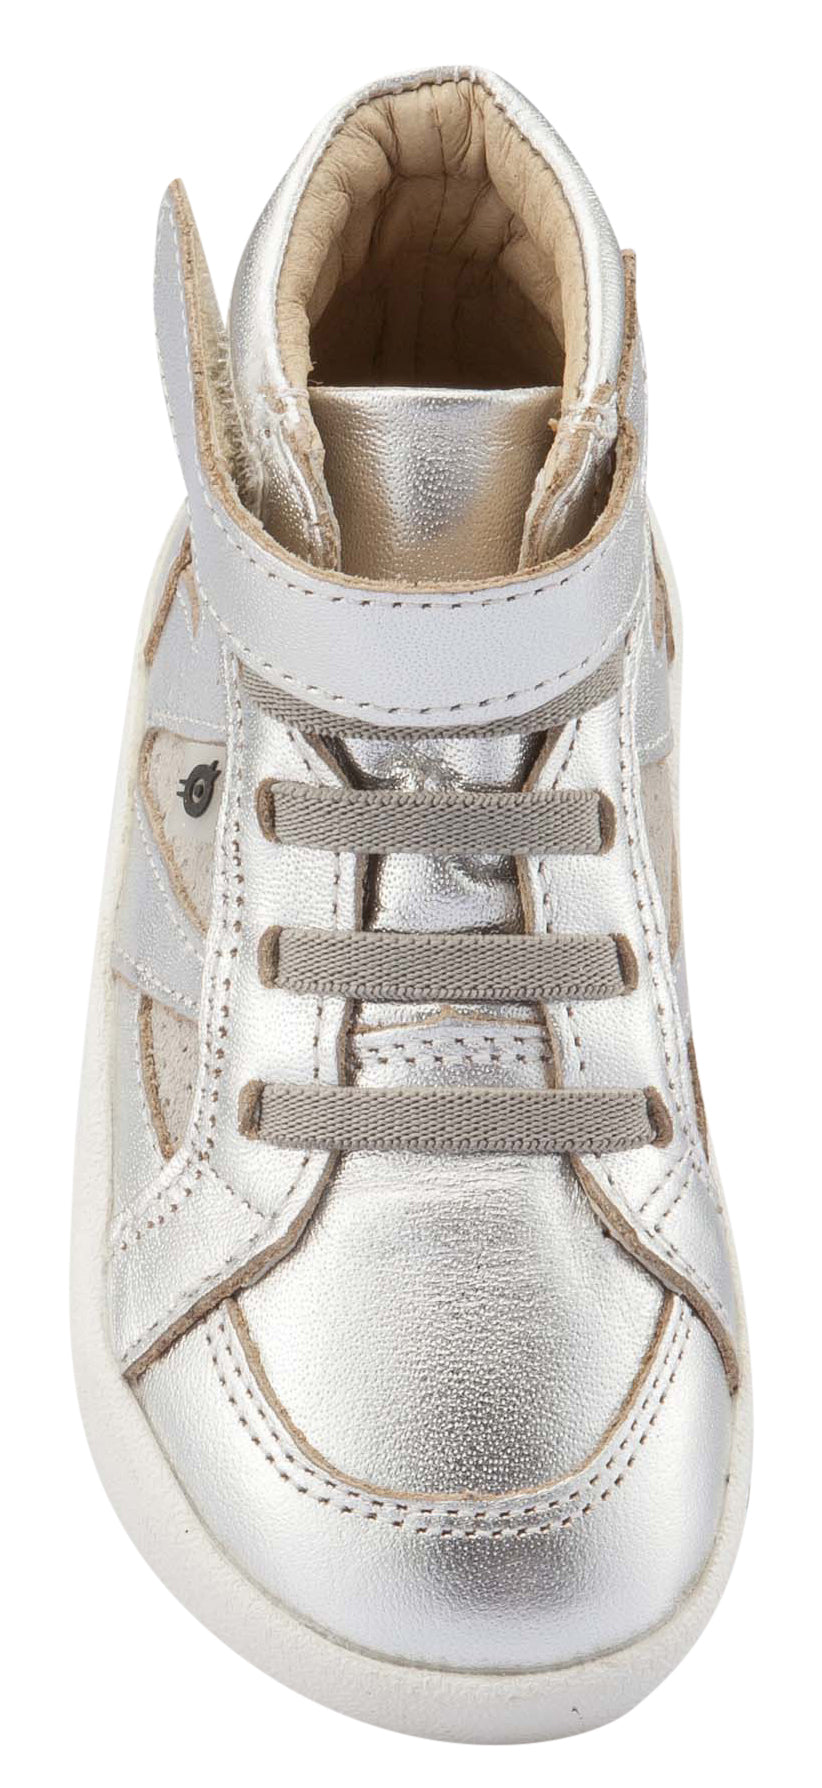 Old Soles Girl's & Boy's New Leader Sneakers, Silver / Grey Suede